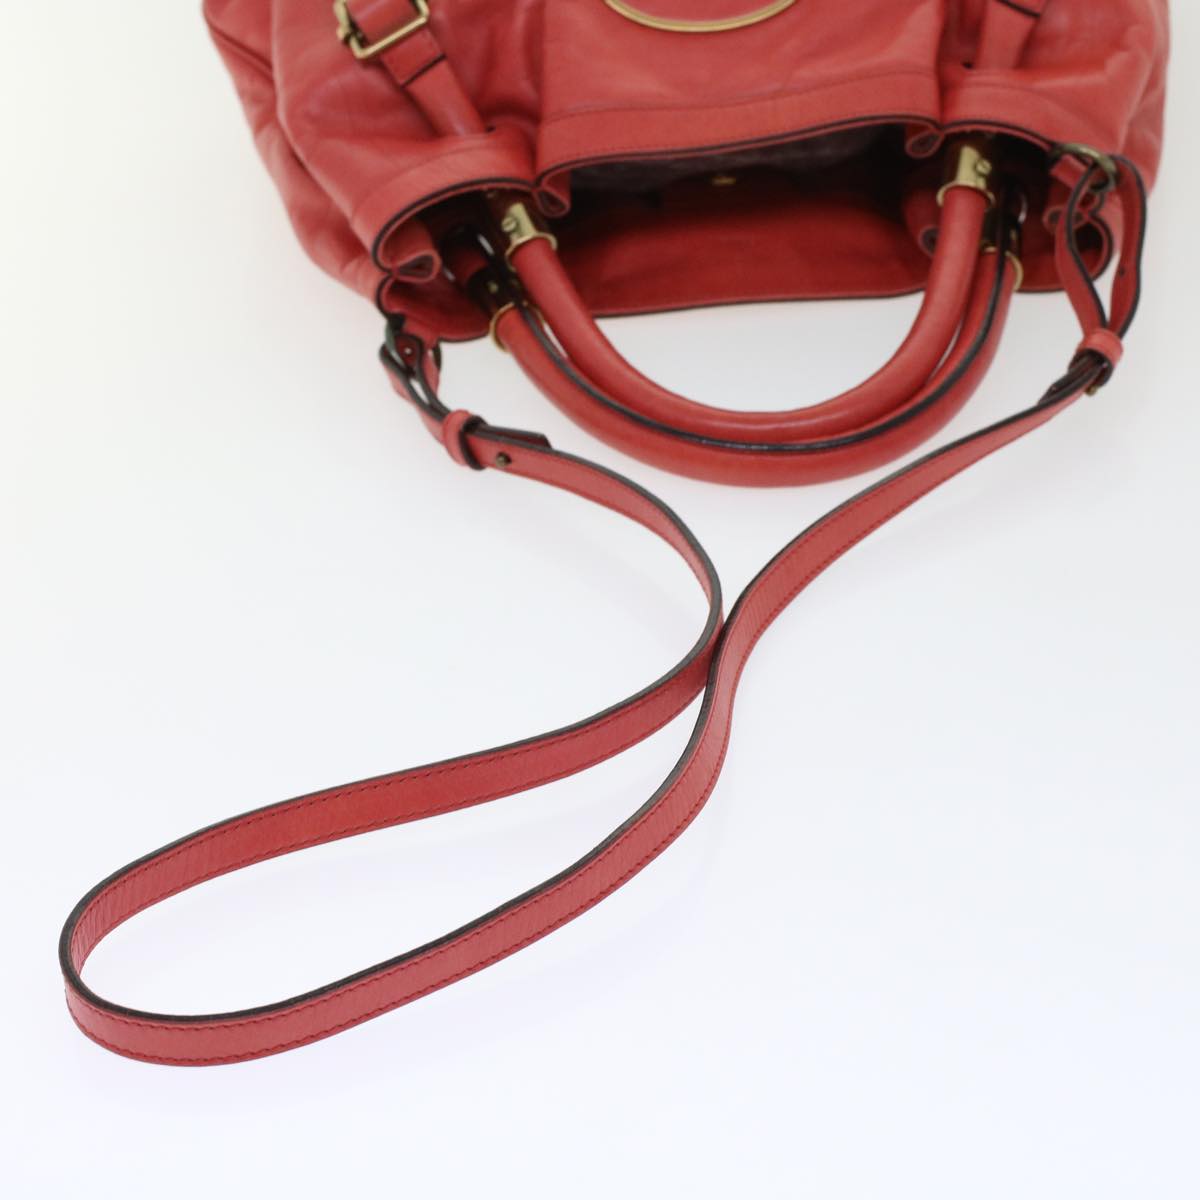 Chloe Victoria Hand Bag Leather 2way Pink Auth 45451